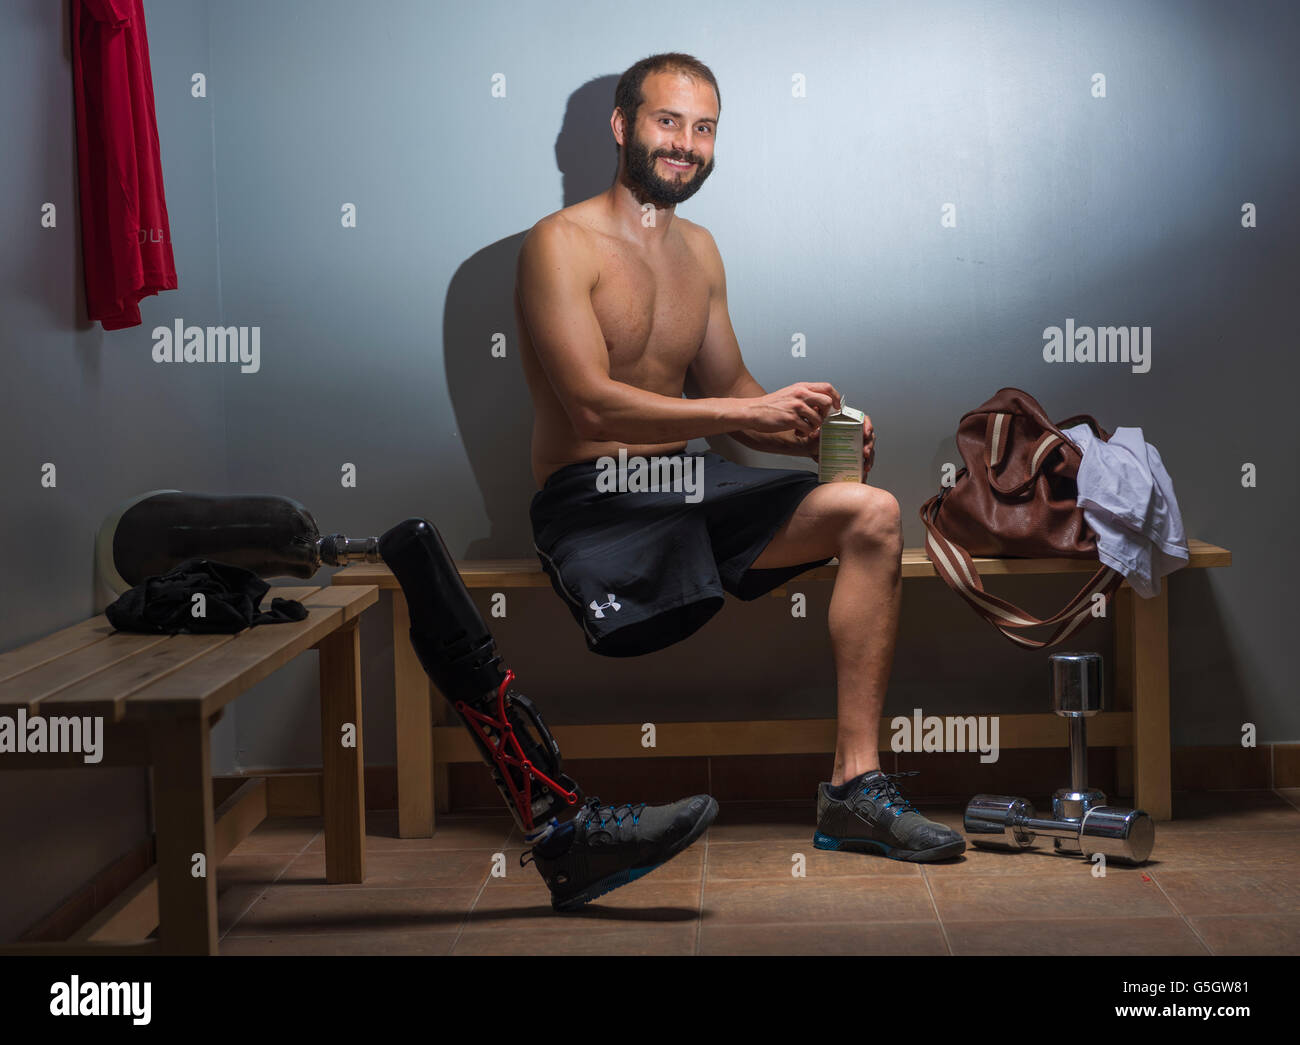 Man with a prosthesis in the gym locker room. Stock Photo